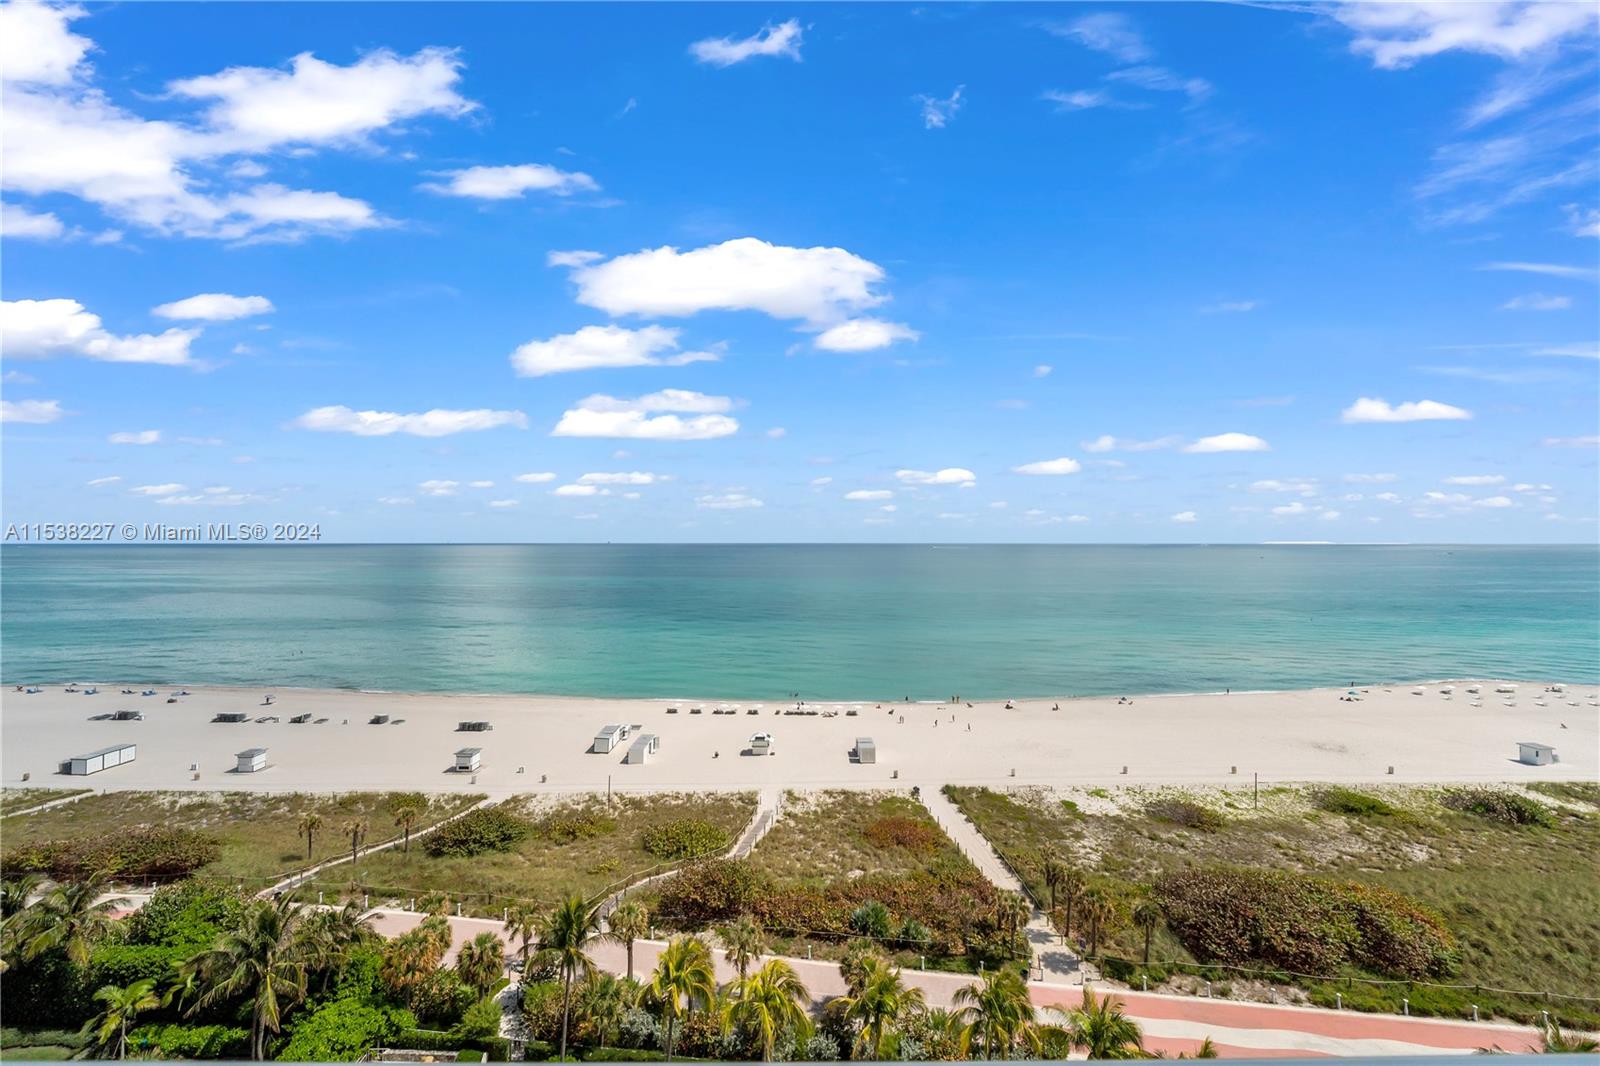 2bed/2.5bath at Mei Condo in millionaires row in Miami Beach. Enjpy amazing ocean and city views from corner unit with wraparound balcony. Tile and wood floors throughout. Furnished. Two parking spots and free valet for guests. Available now!